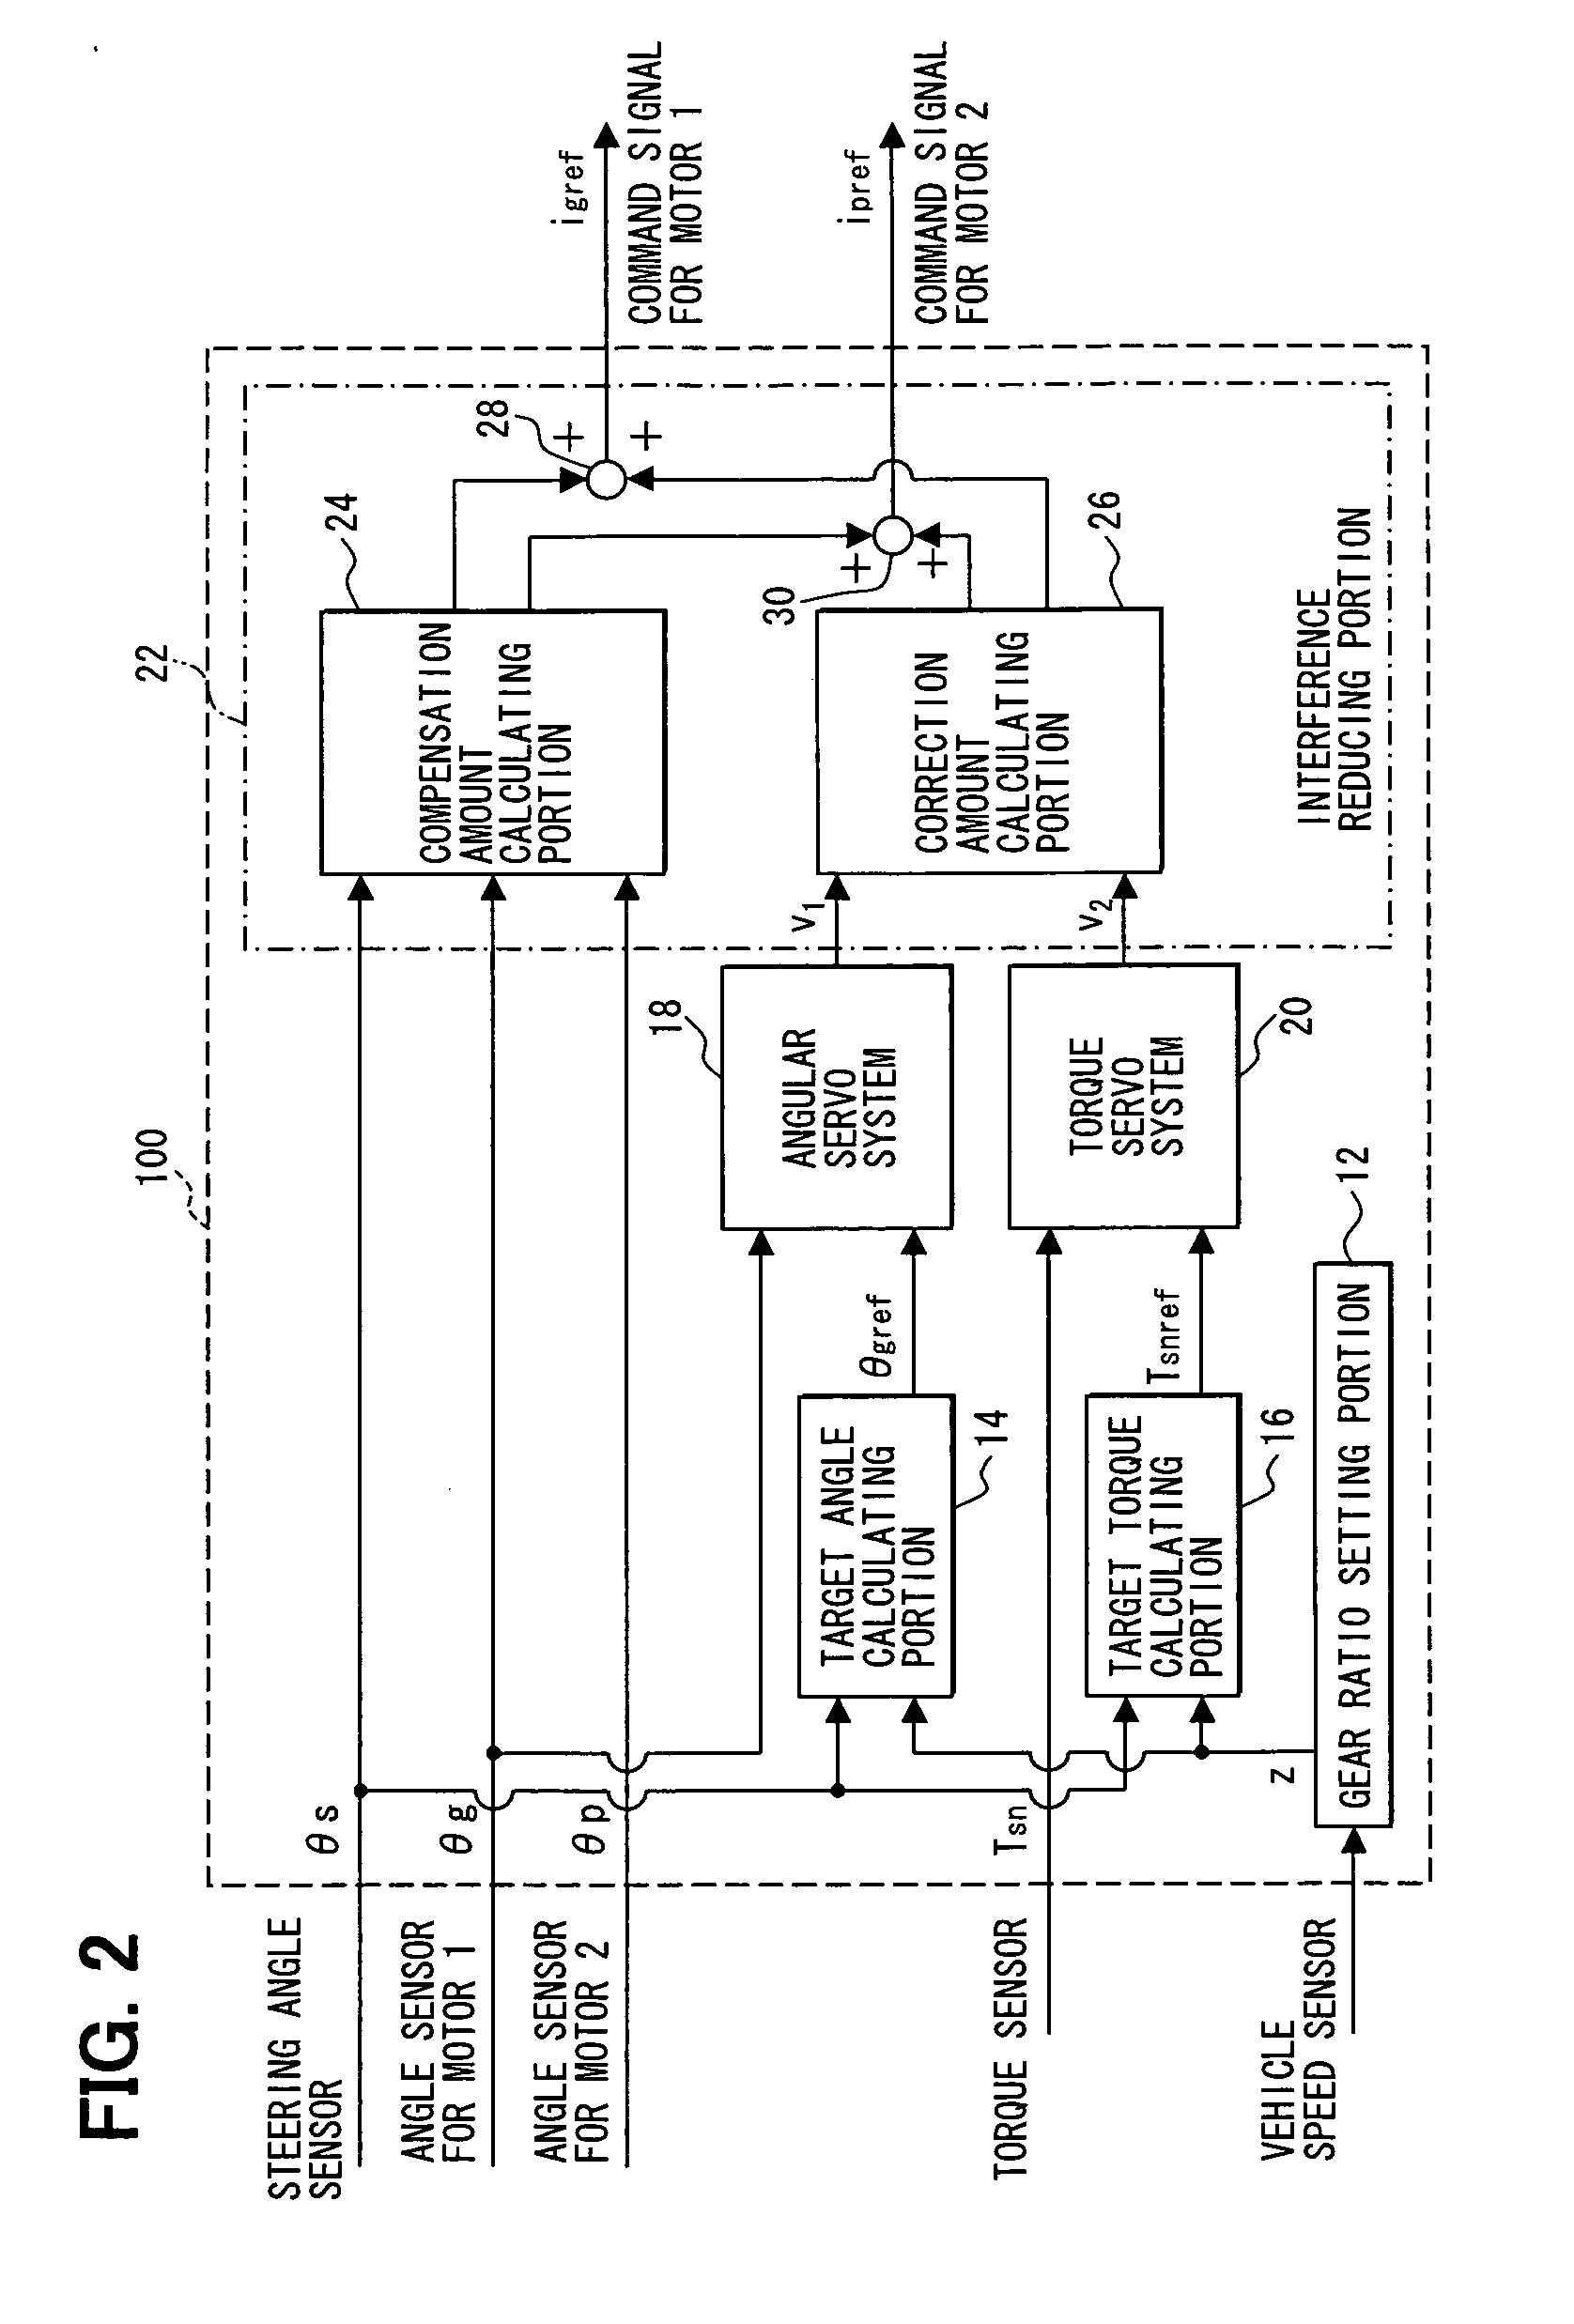 Control device for electrical power steering system